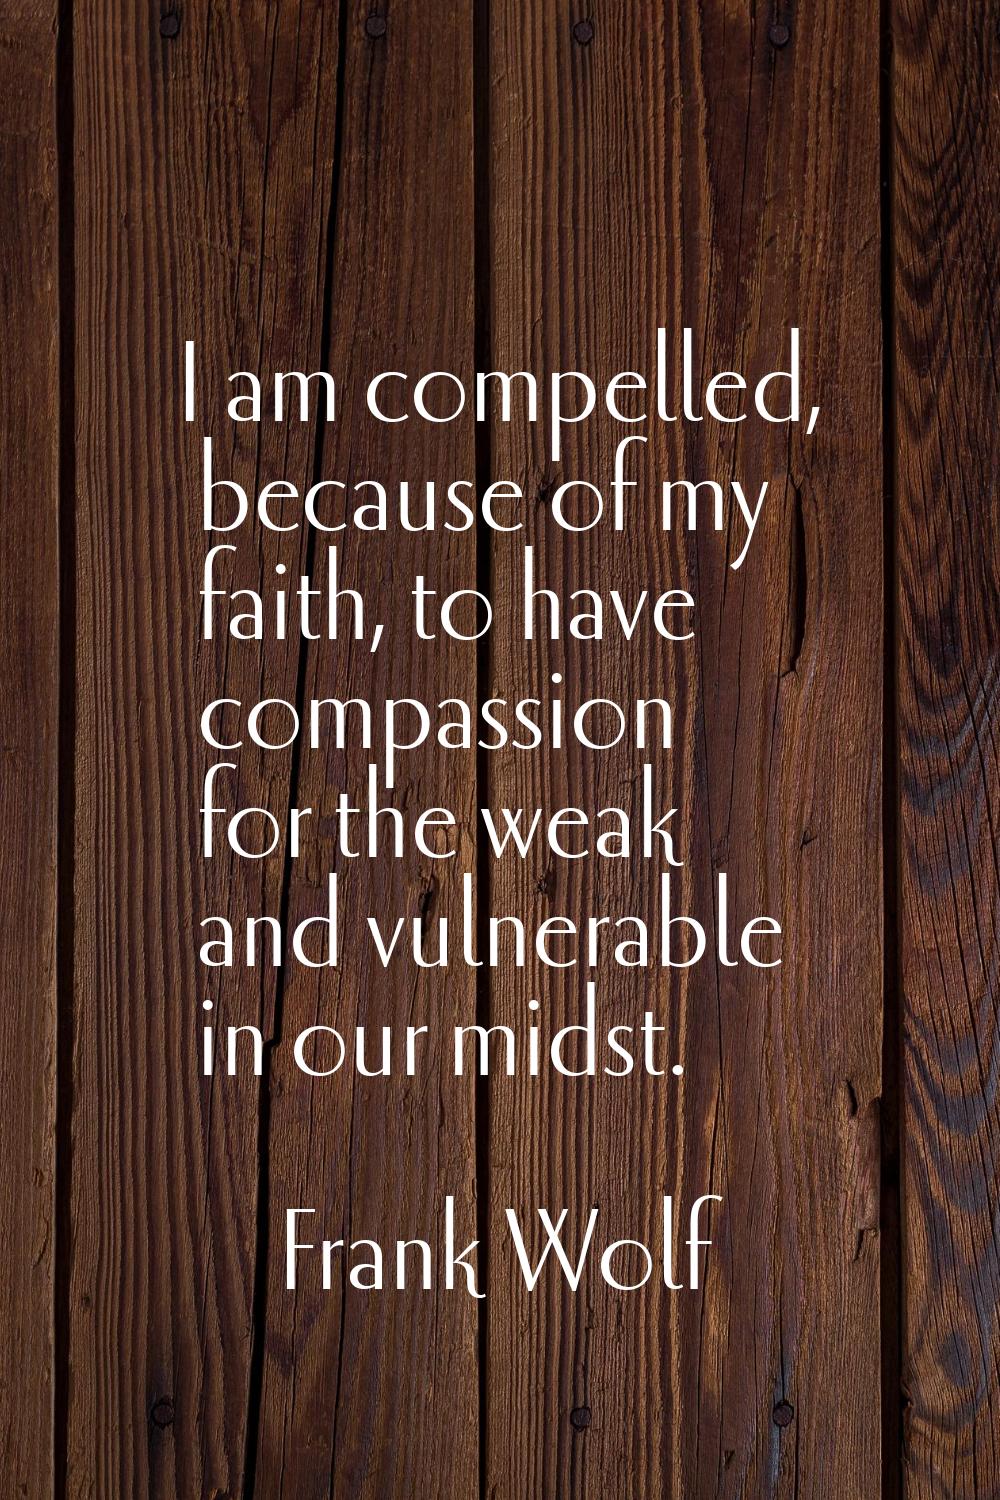 I am compelled, because of my faith, to have compassion for the weak and vulnerable in our midst.